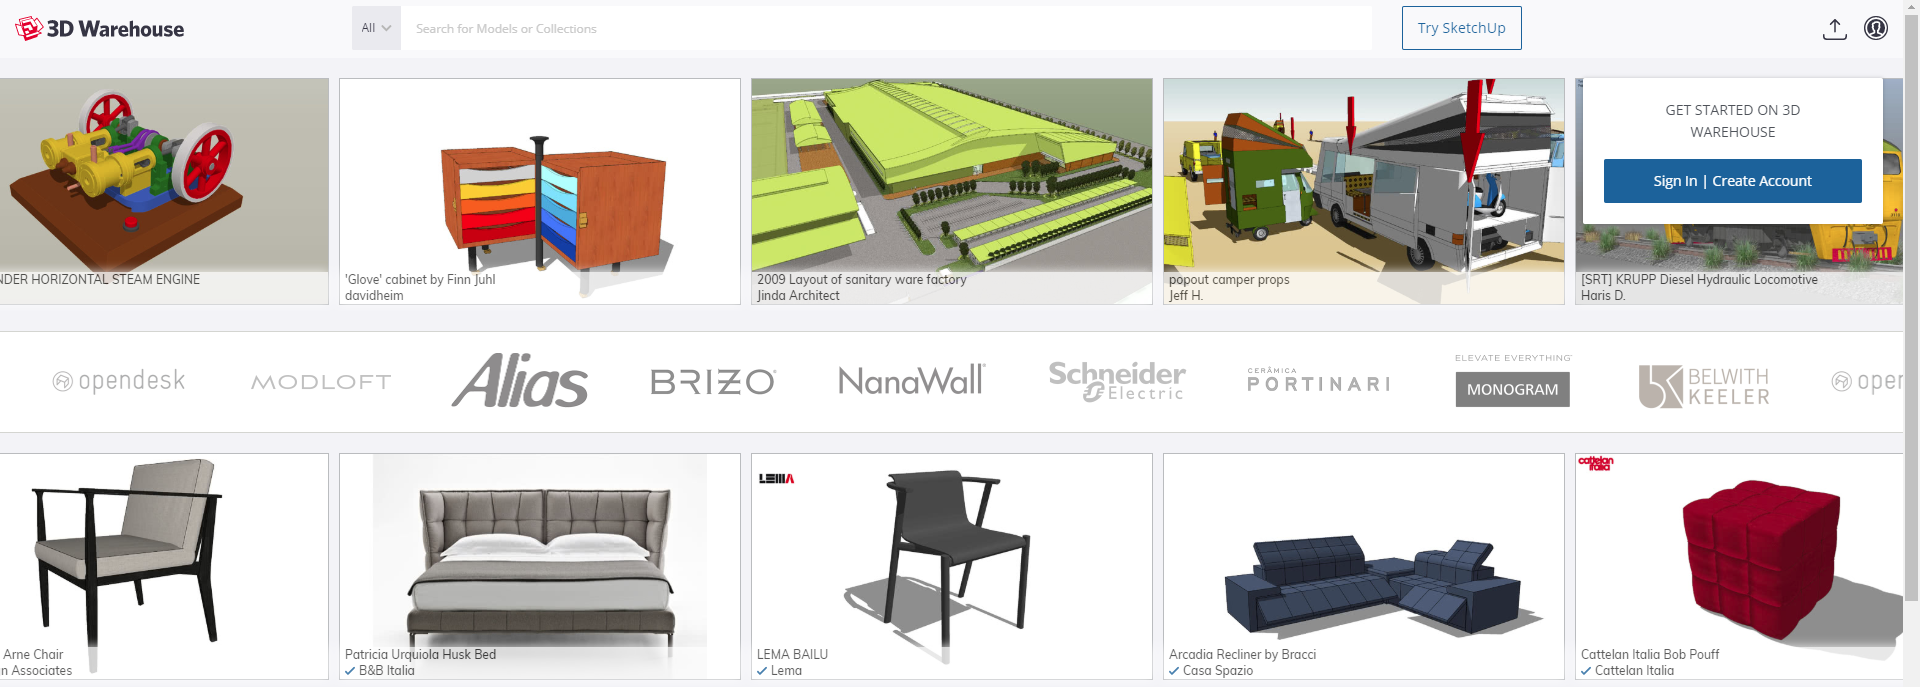 Now: Download in 3D Warehouse only possible with login - pCon-Blog